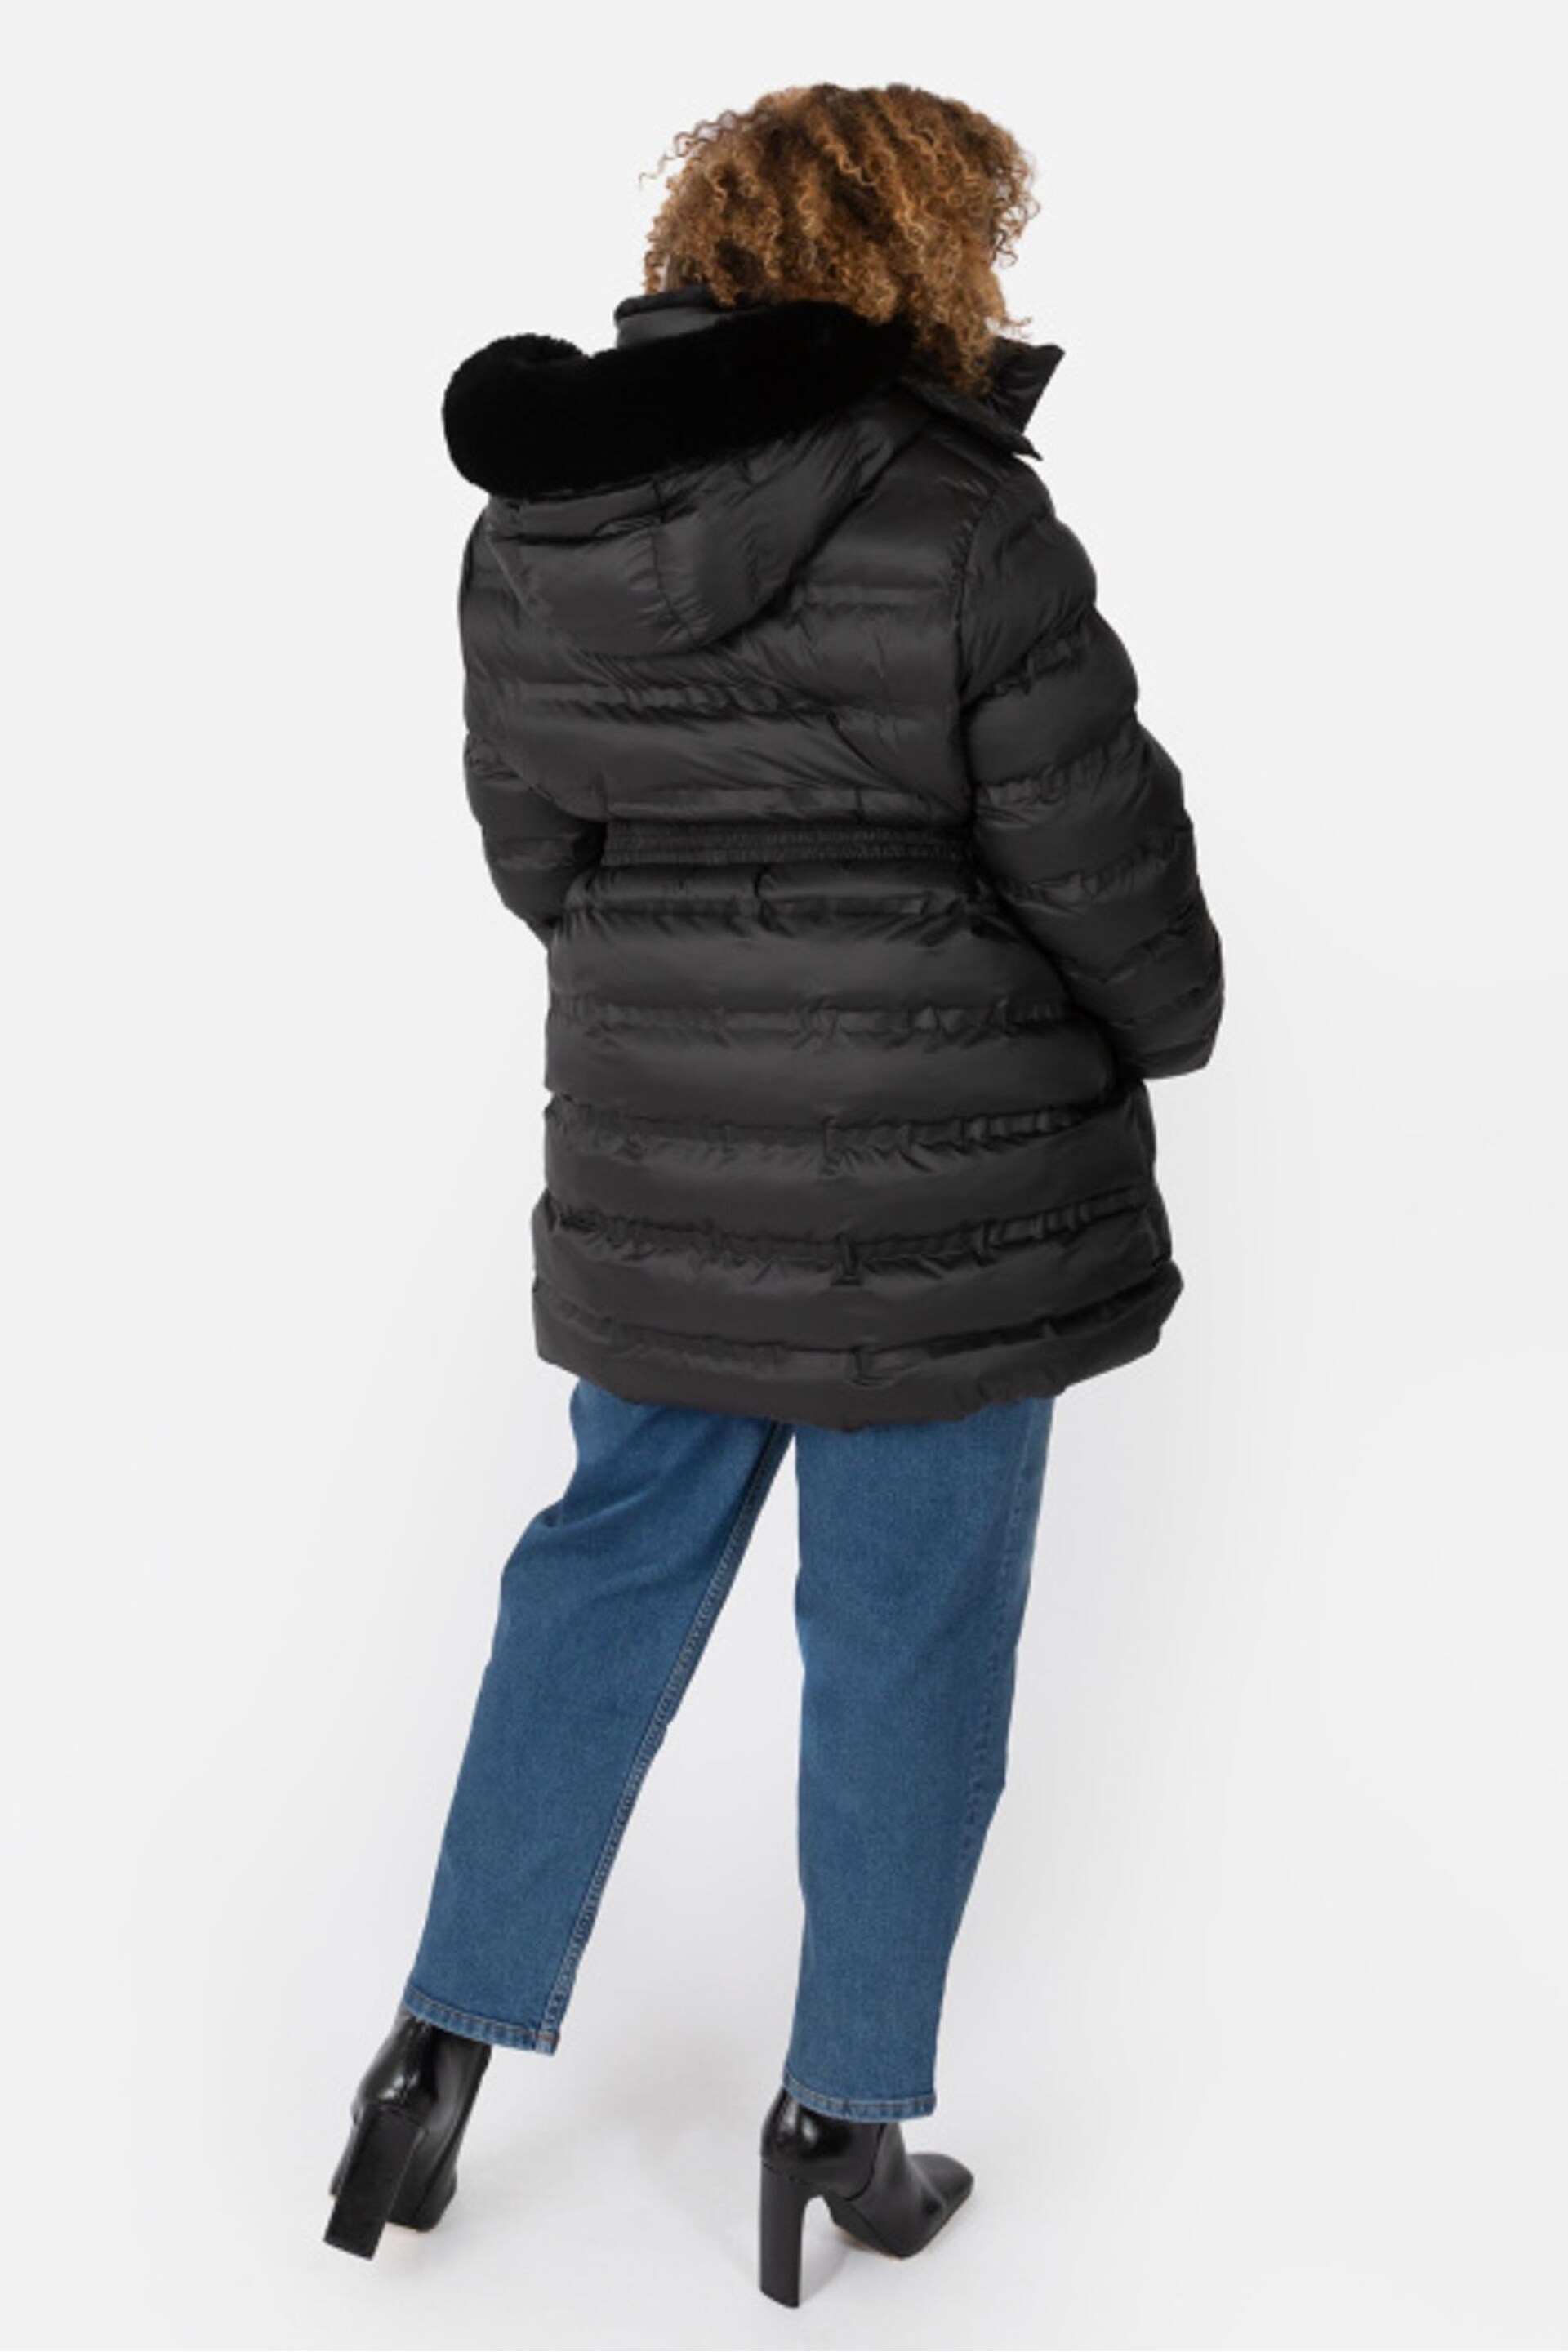 Lovedrobe Belted Padded Coat with Faux Fur Trim Hood - Image 2 of 6